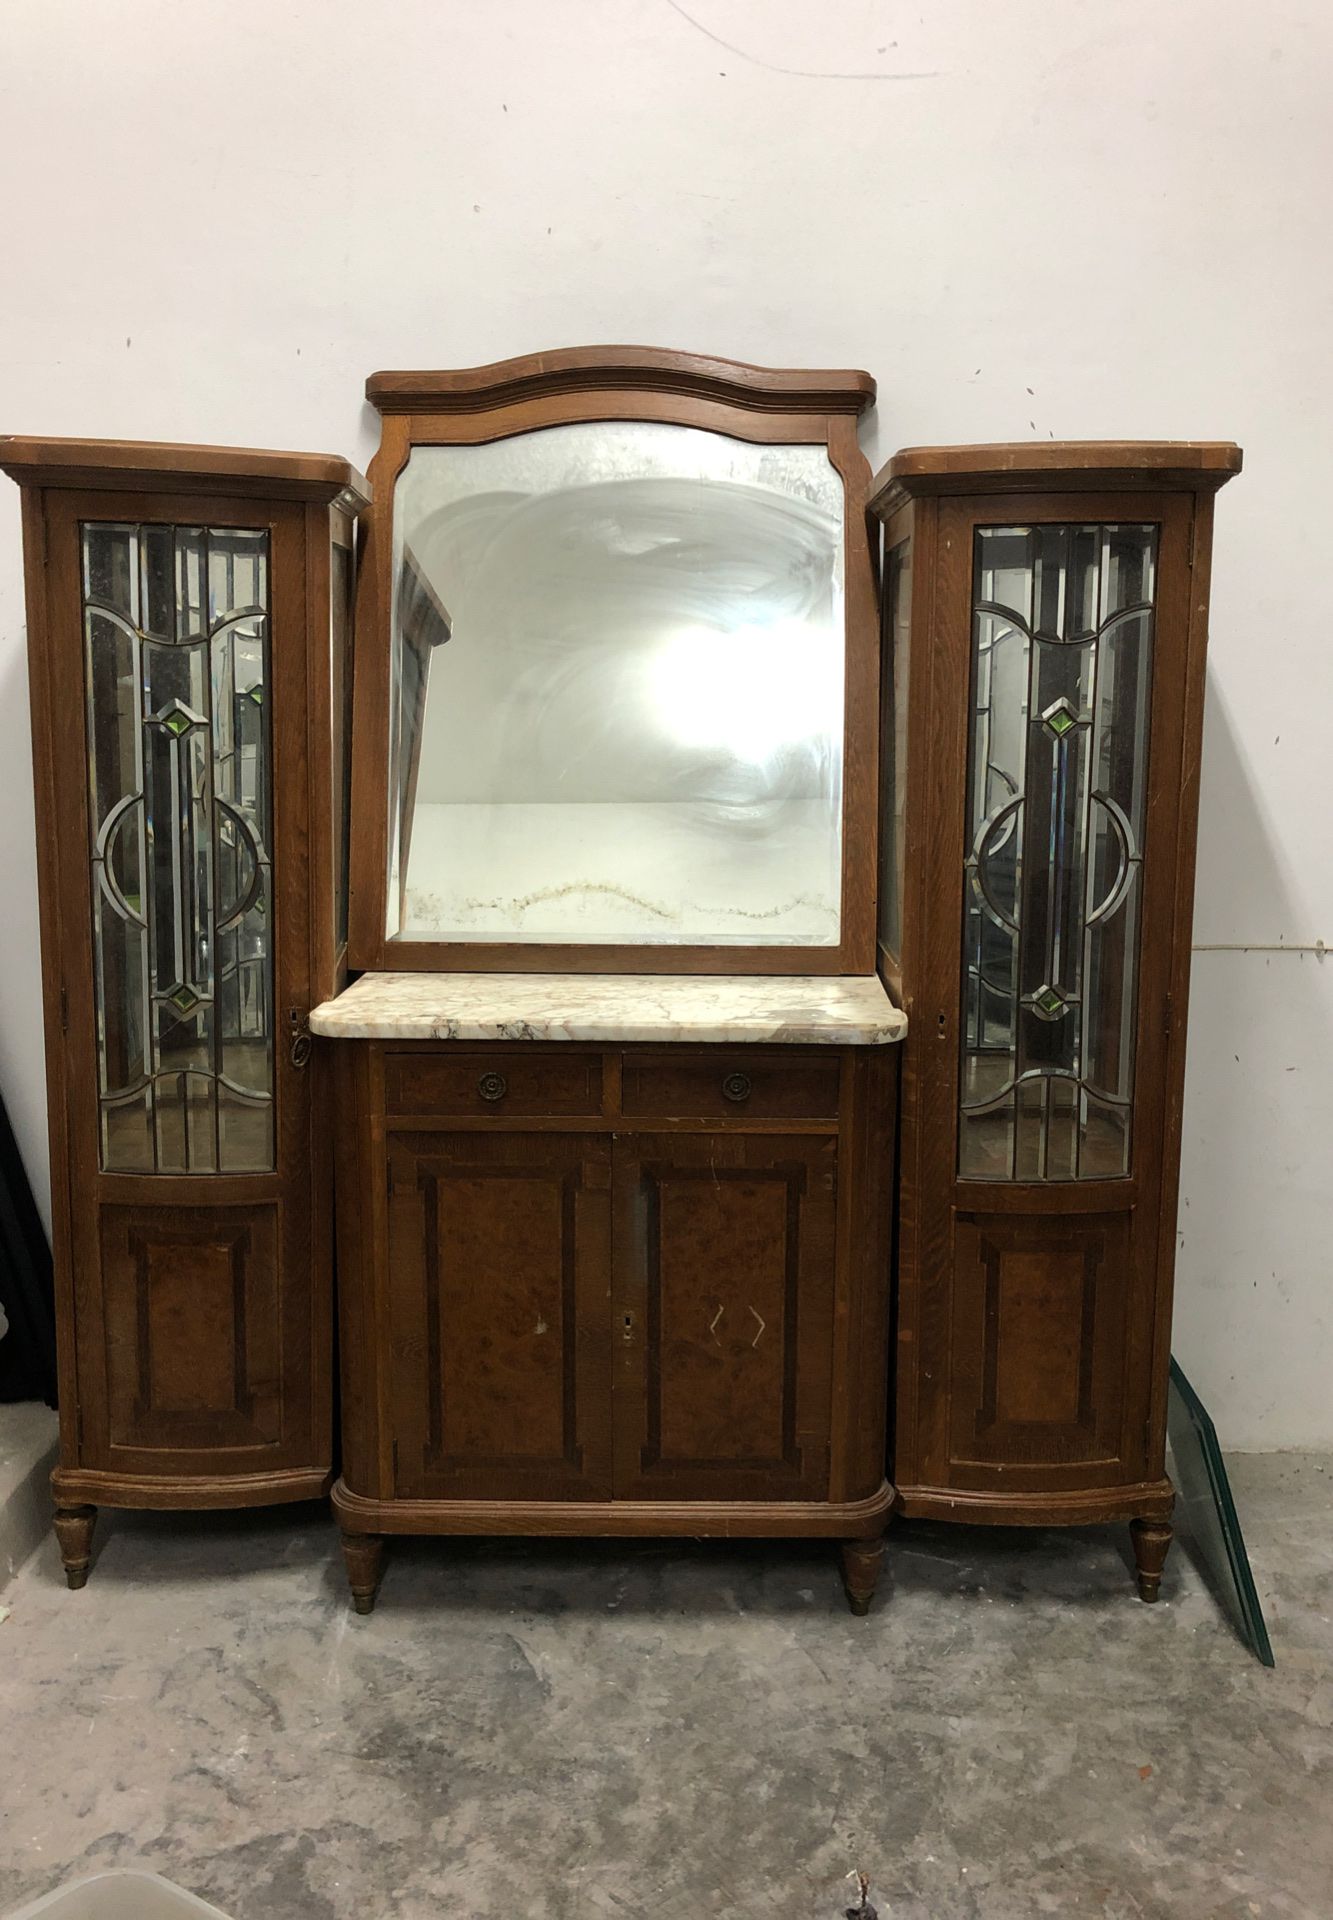 Rare Antique Cabinet 5 part 100+ years moving sale